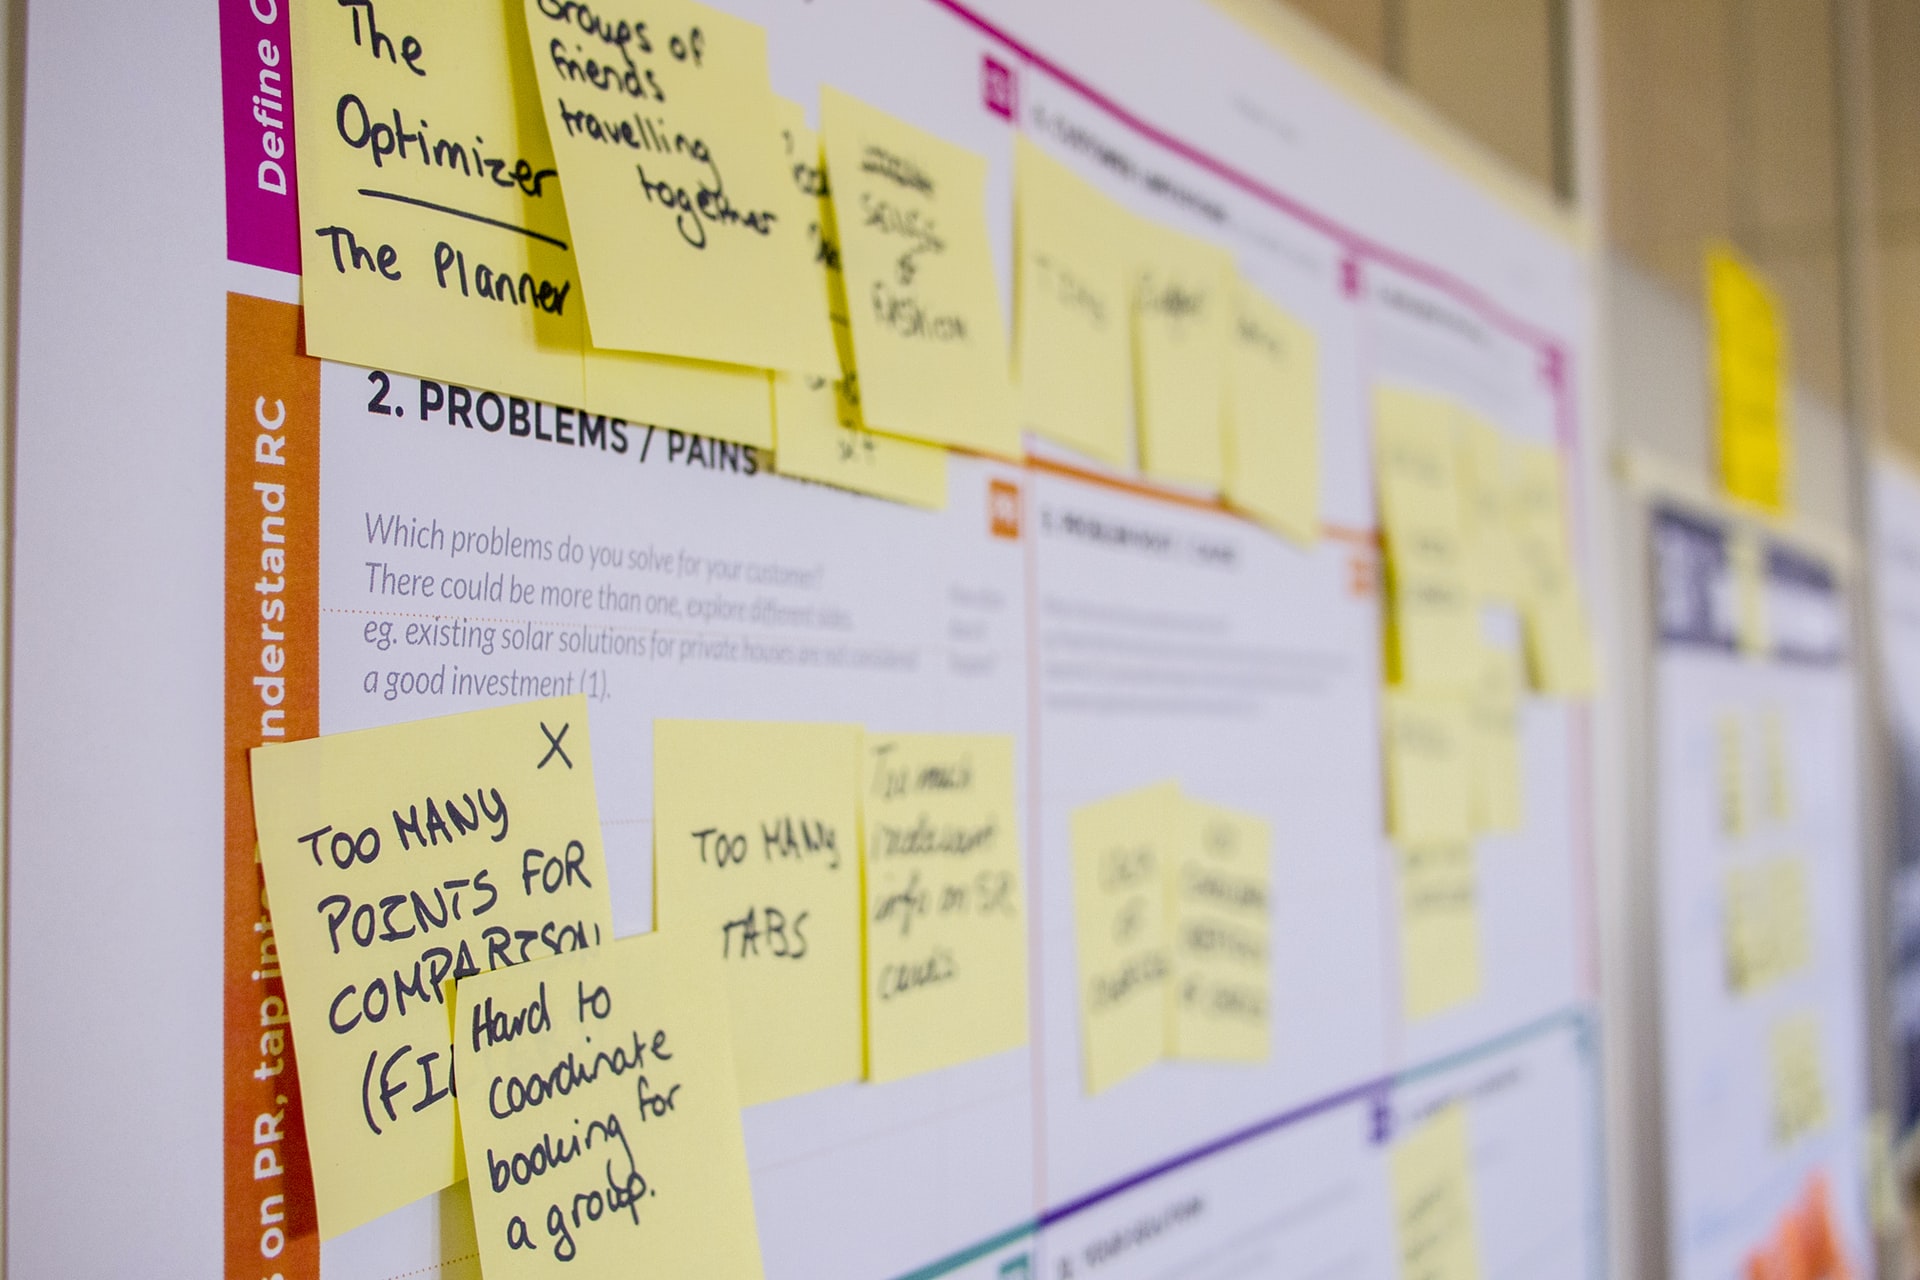 Photo of a project planning board covered in yellow sticky notes.